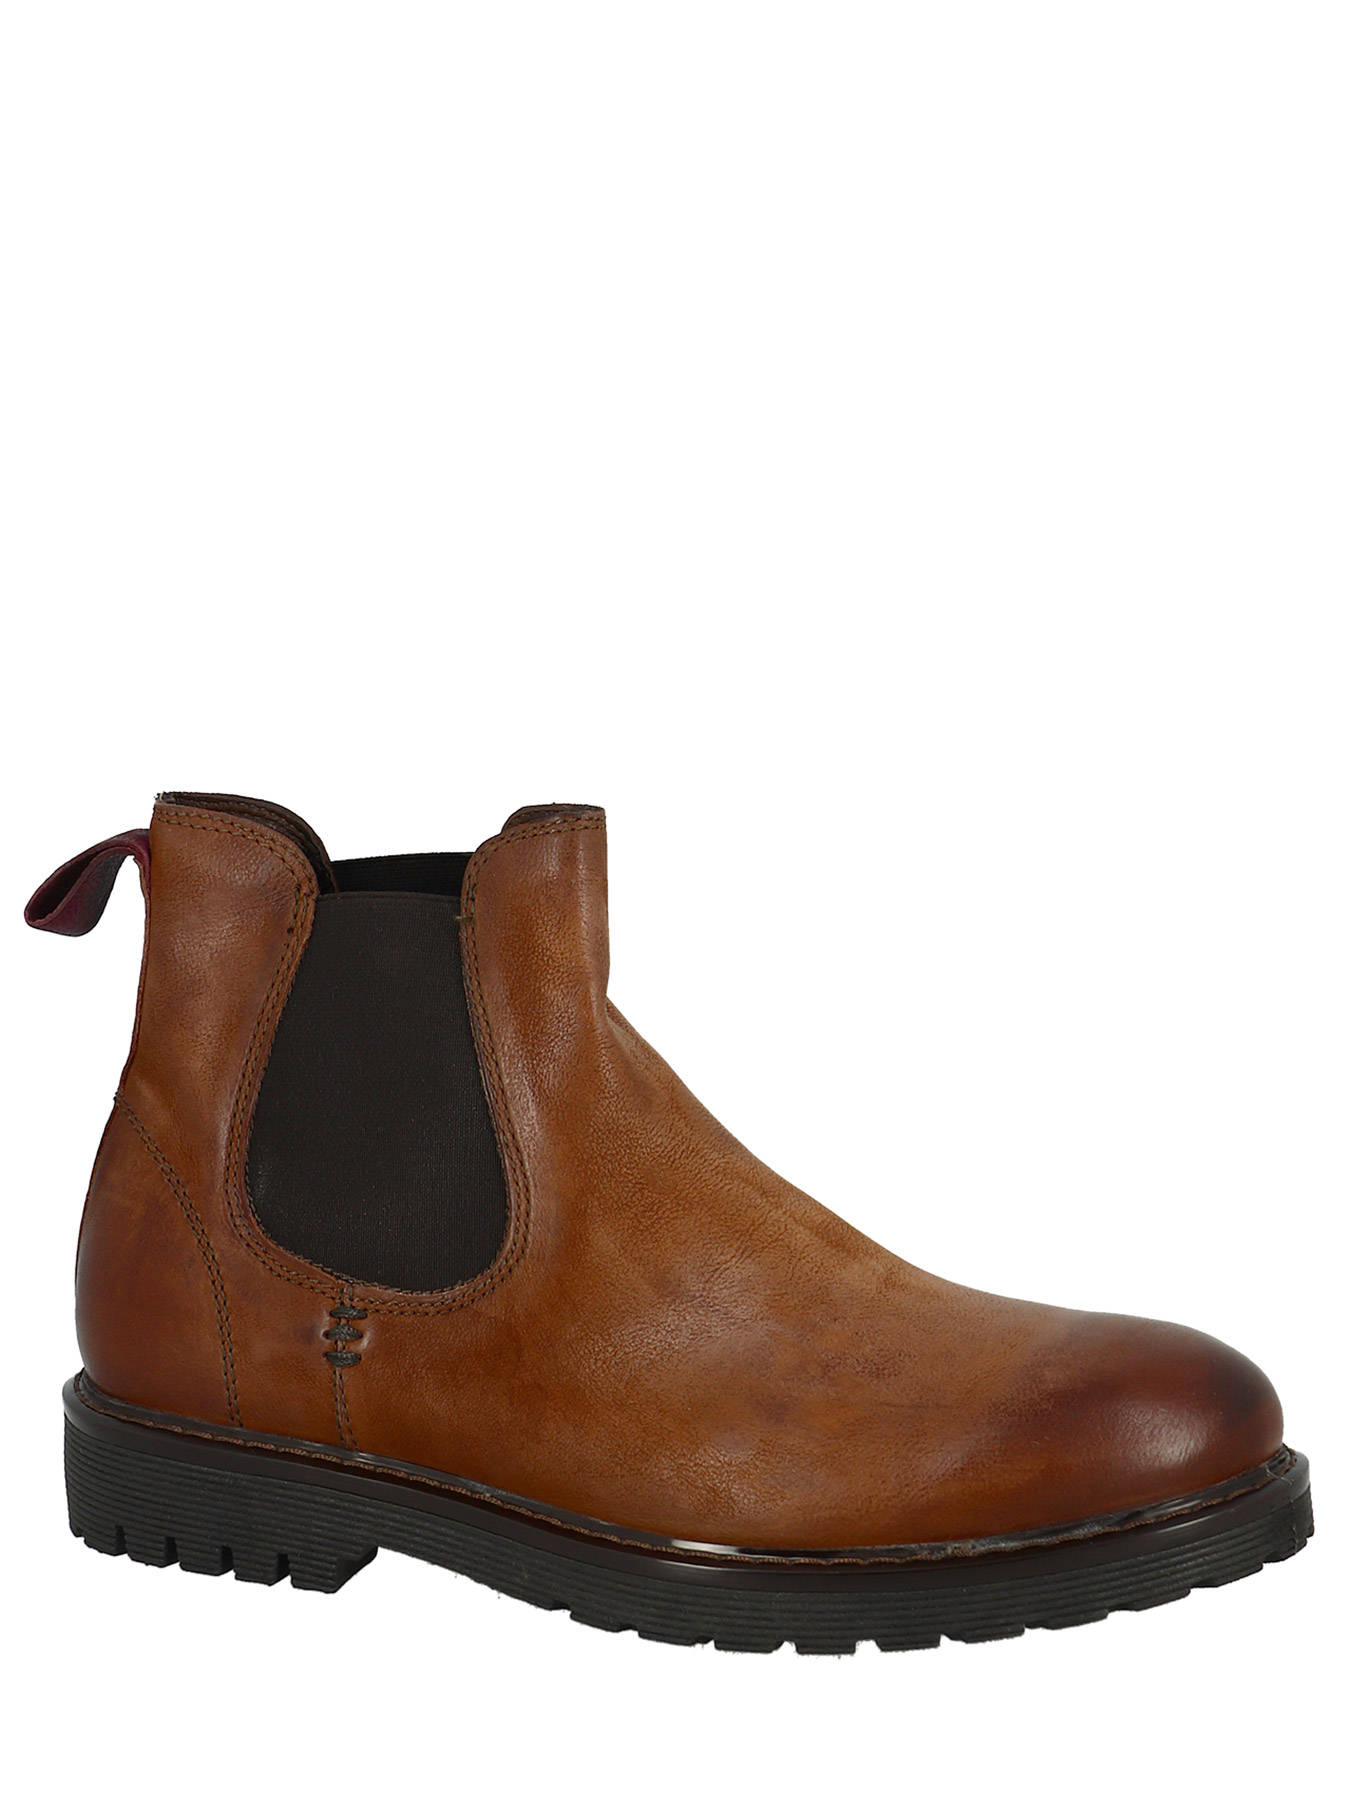 Mjus Boots 363201-201 - best prices